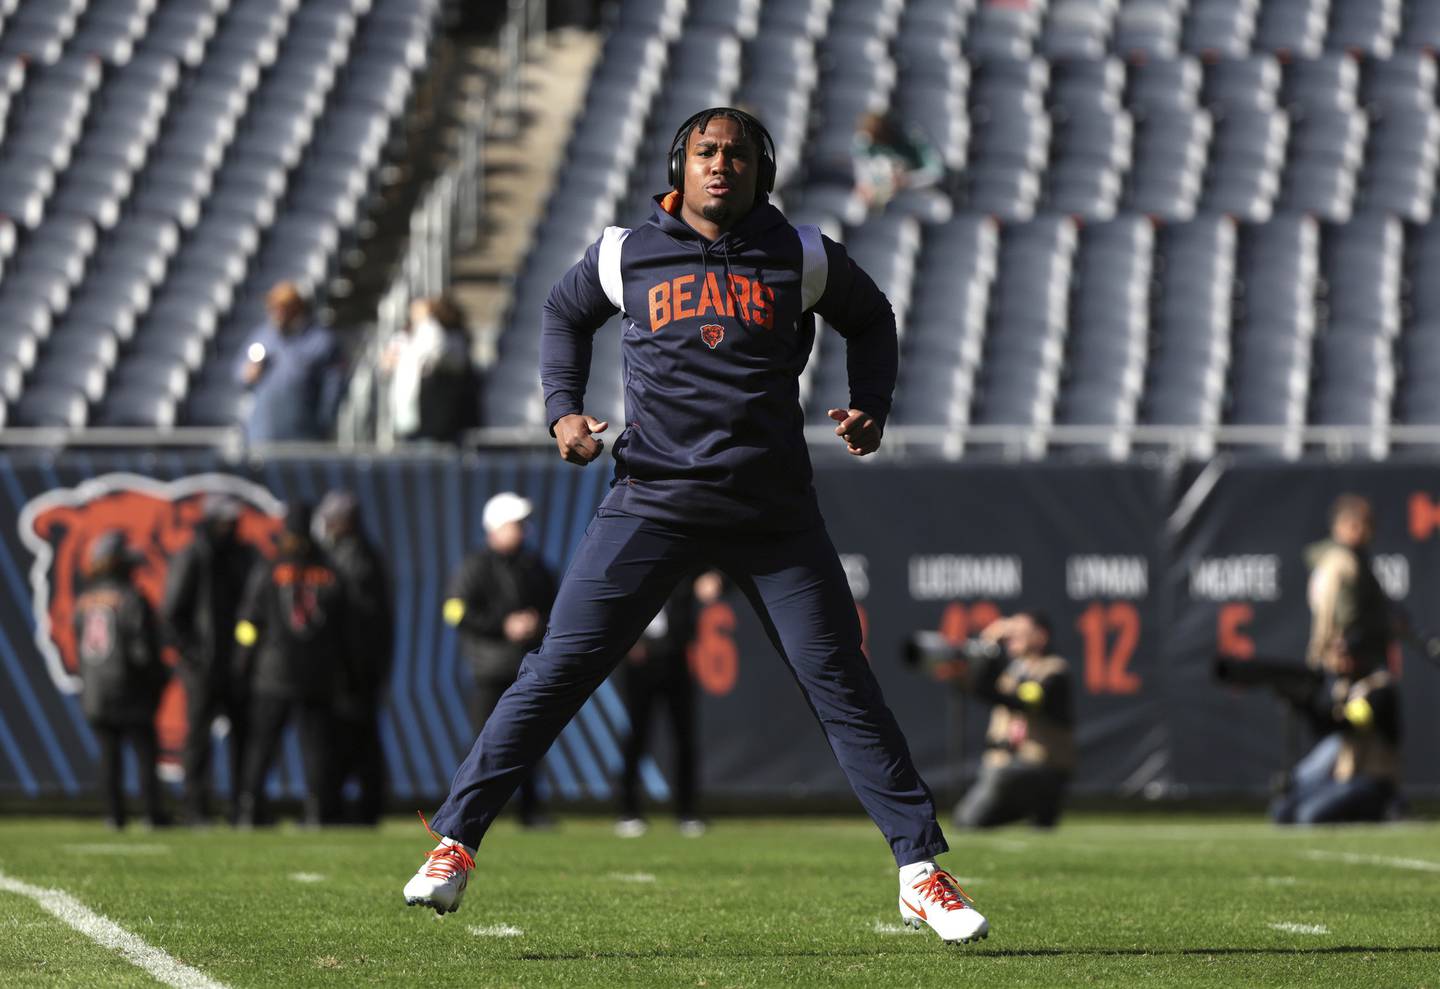 Bears running back Khalil Herbert warms up before a game against the Dolphins at Soldier Field on Nov. 6, 2022.